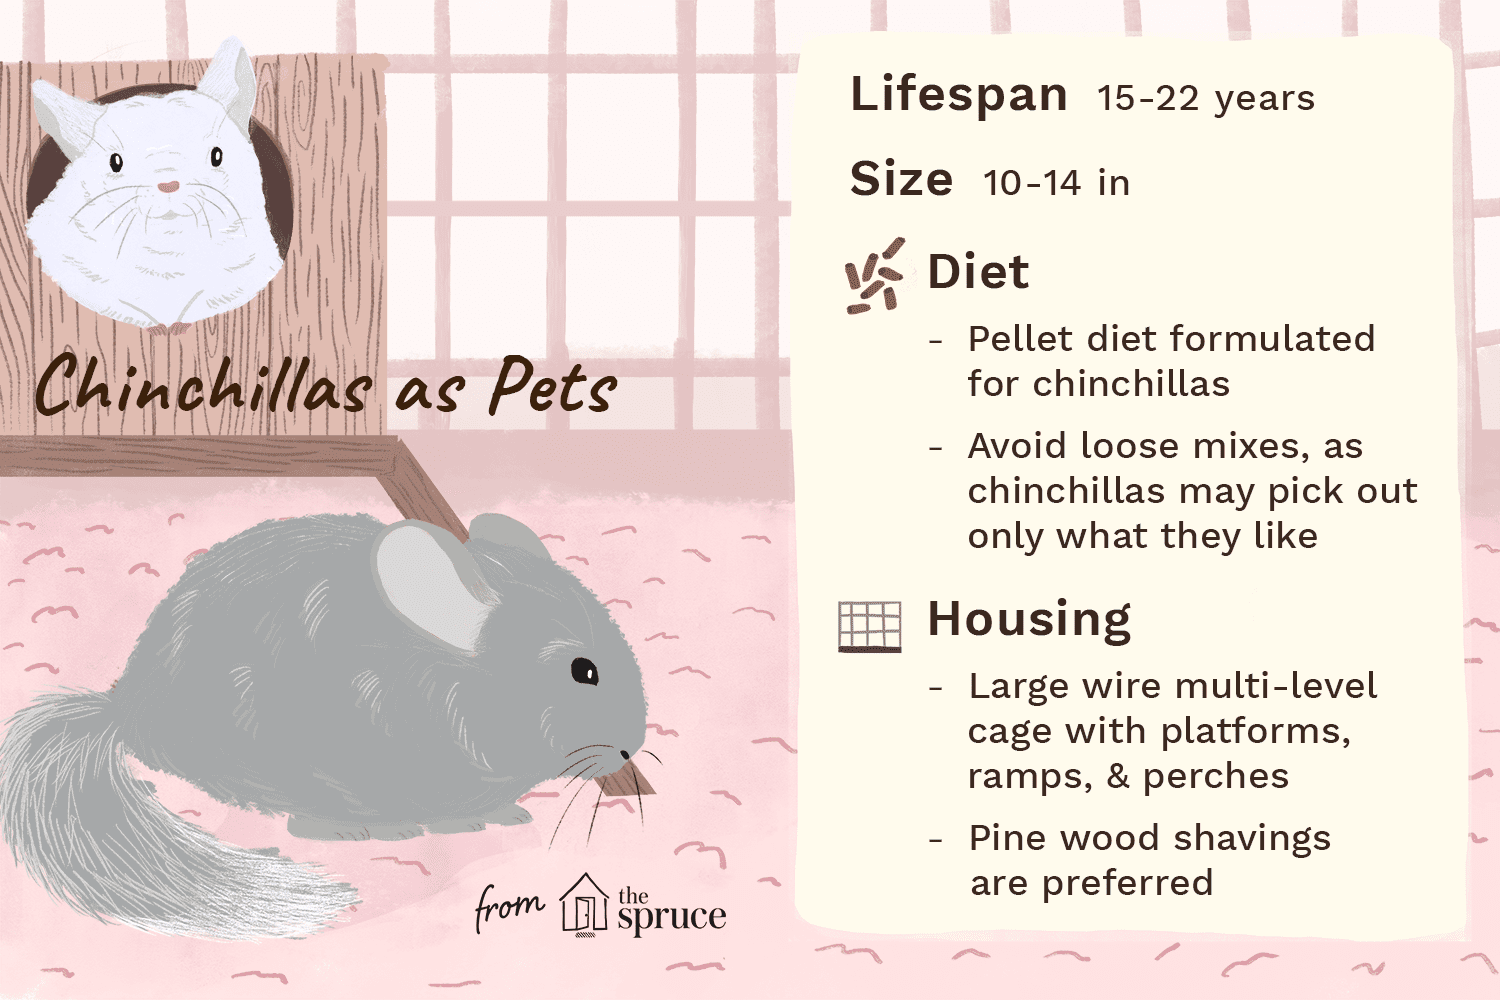 illustration of chinchillas as pets—care sheet